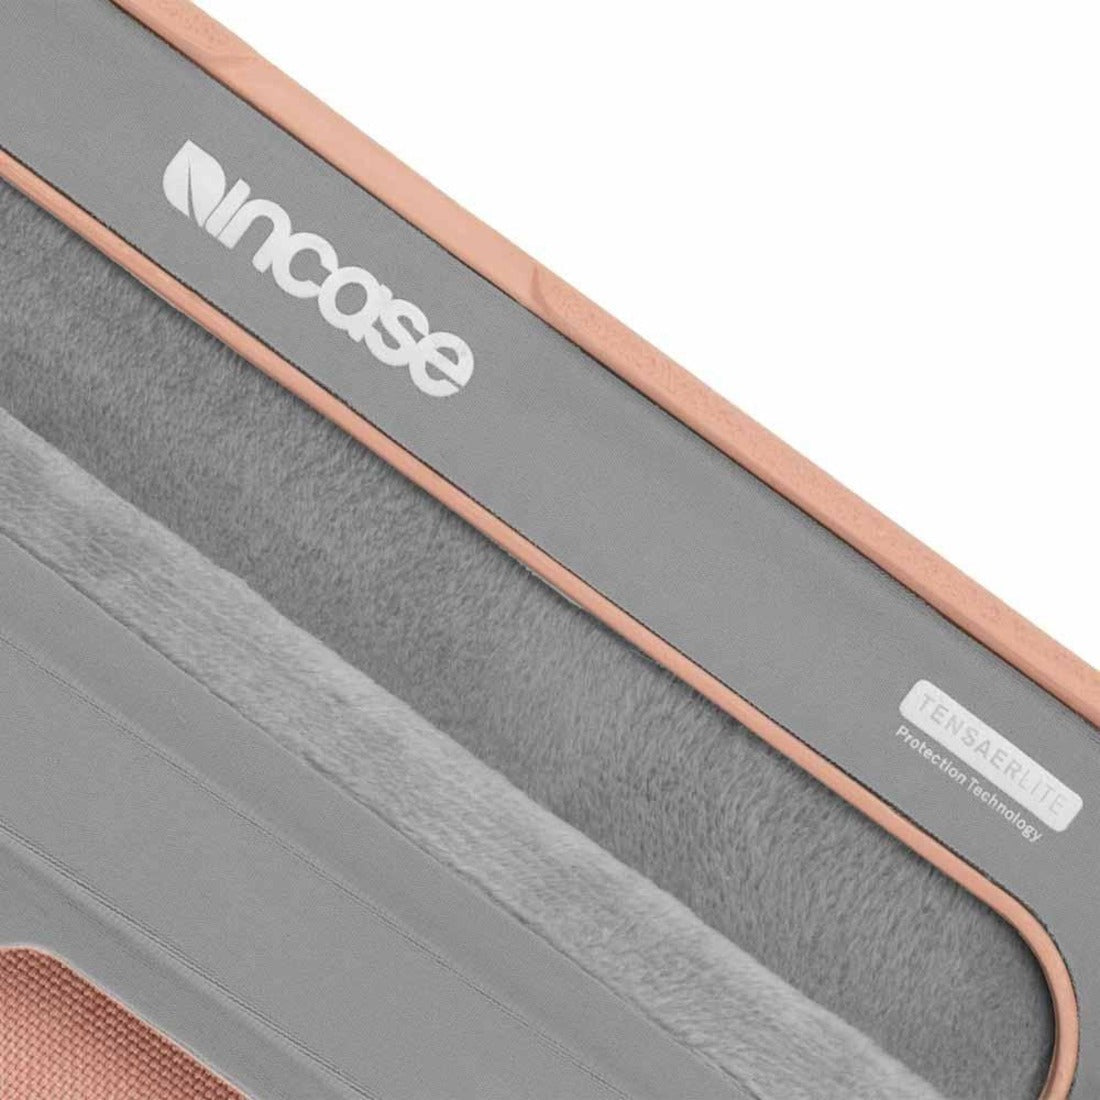 Incase ICON Carrying Case (Sleeve) for 13" Apple MacBook Air (Retina Display) MacBook Pro - Blush Pink